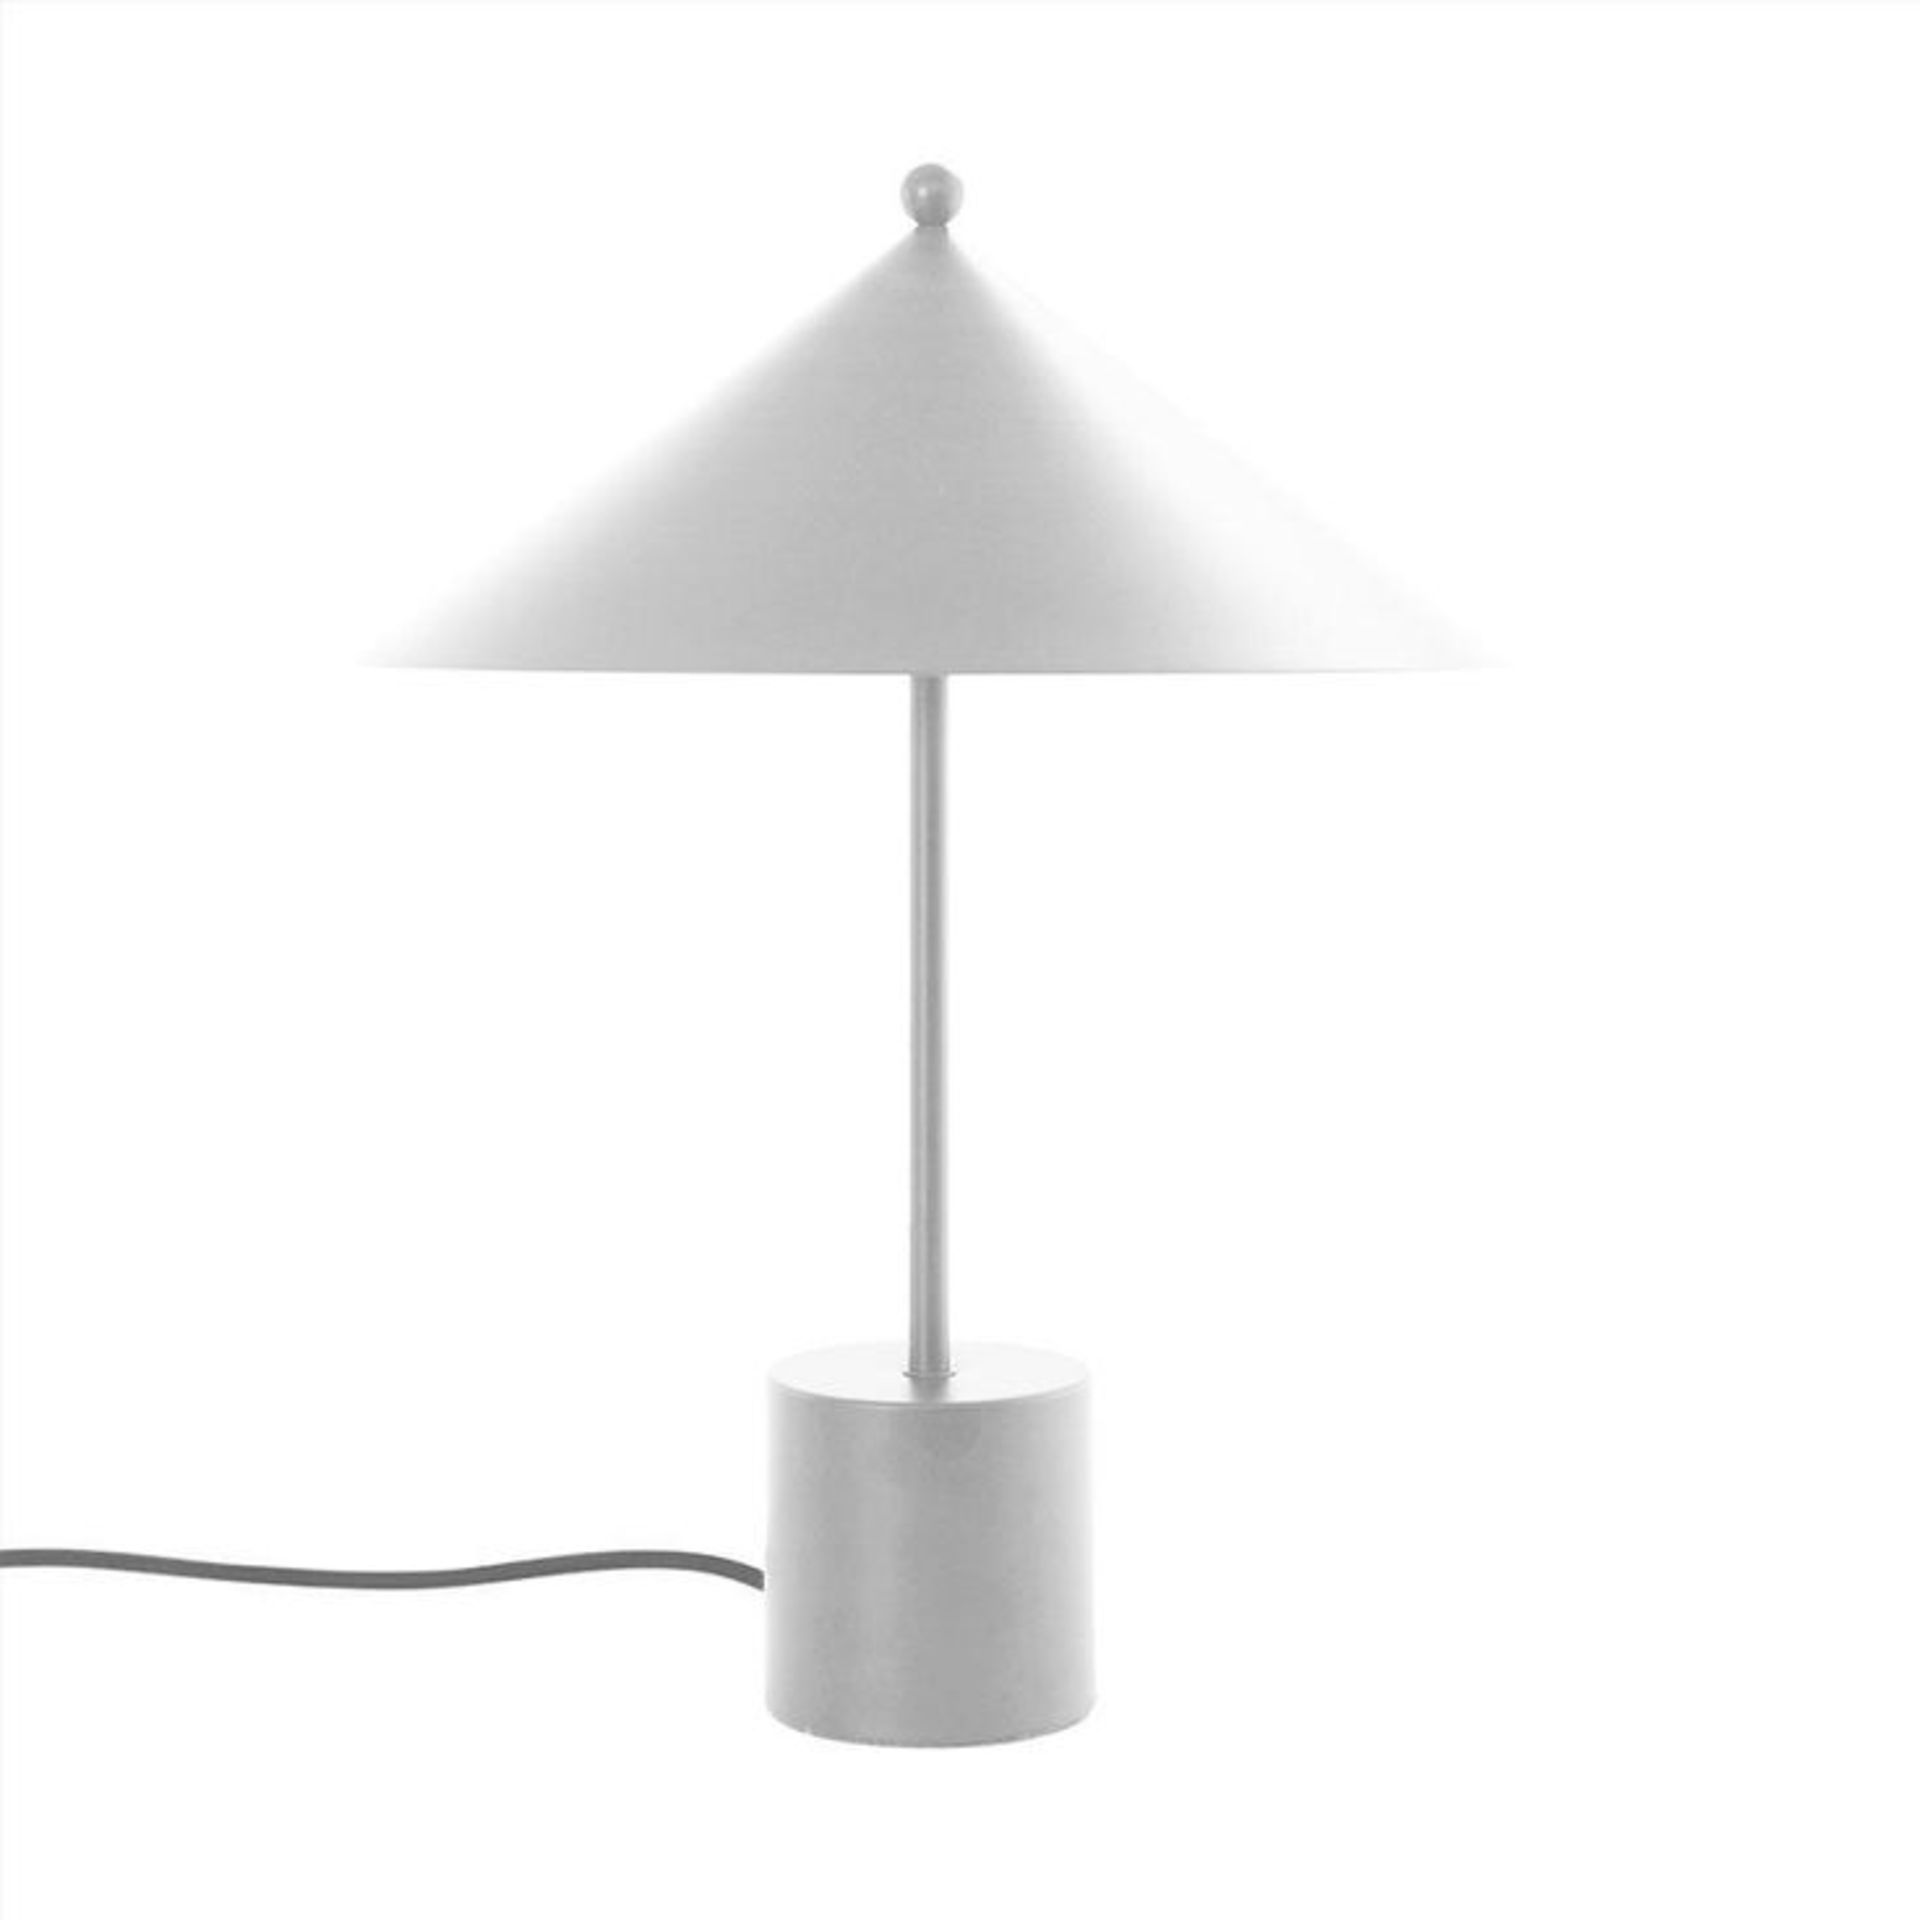 A Pair Of Kasa Table Lamps From OYOY Is A Minimalist Lamp With Clear, Geometric Shapes. The Cone-